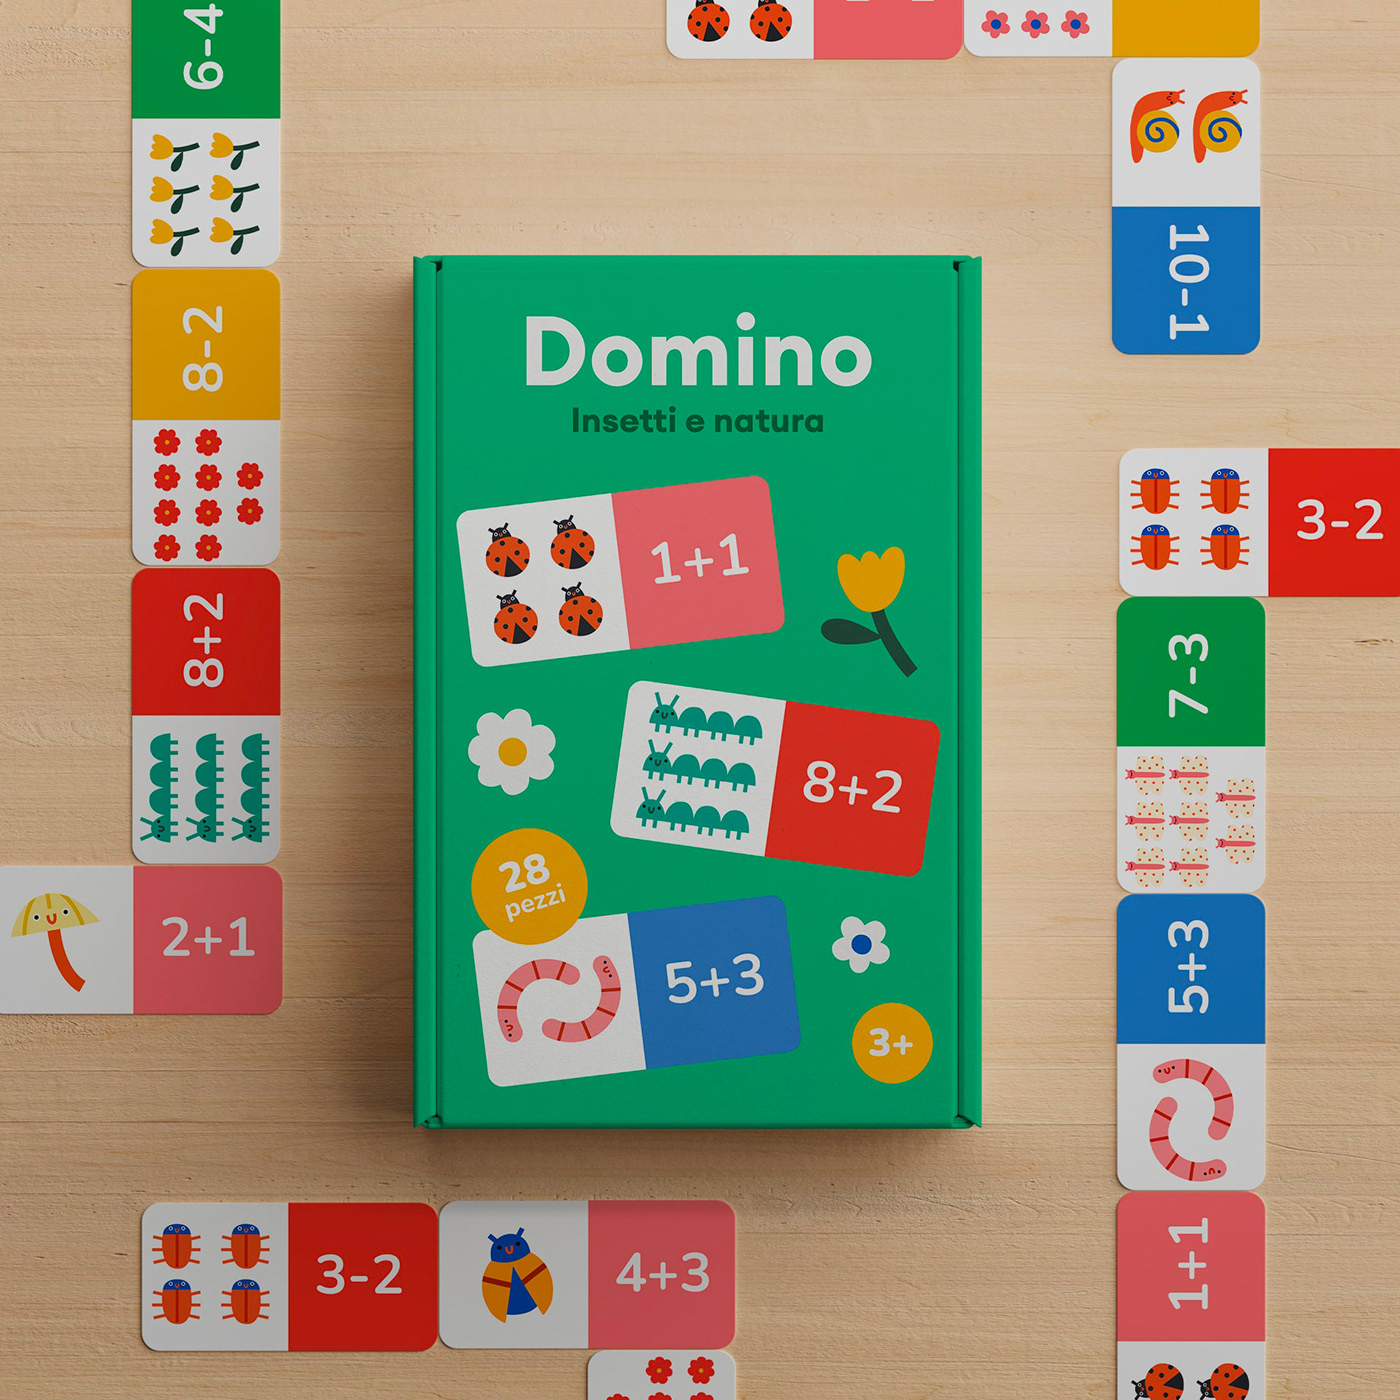 Domino game for kids and children with insect and nature illustration